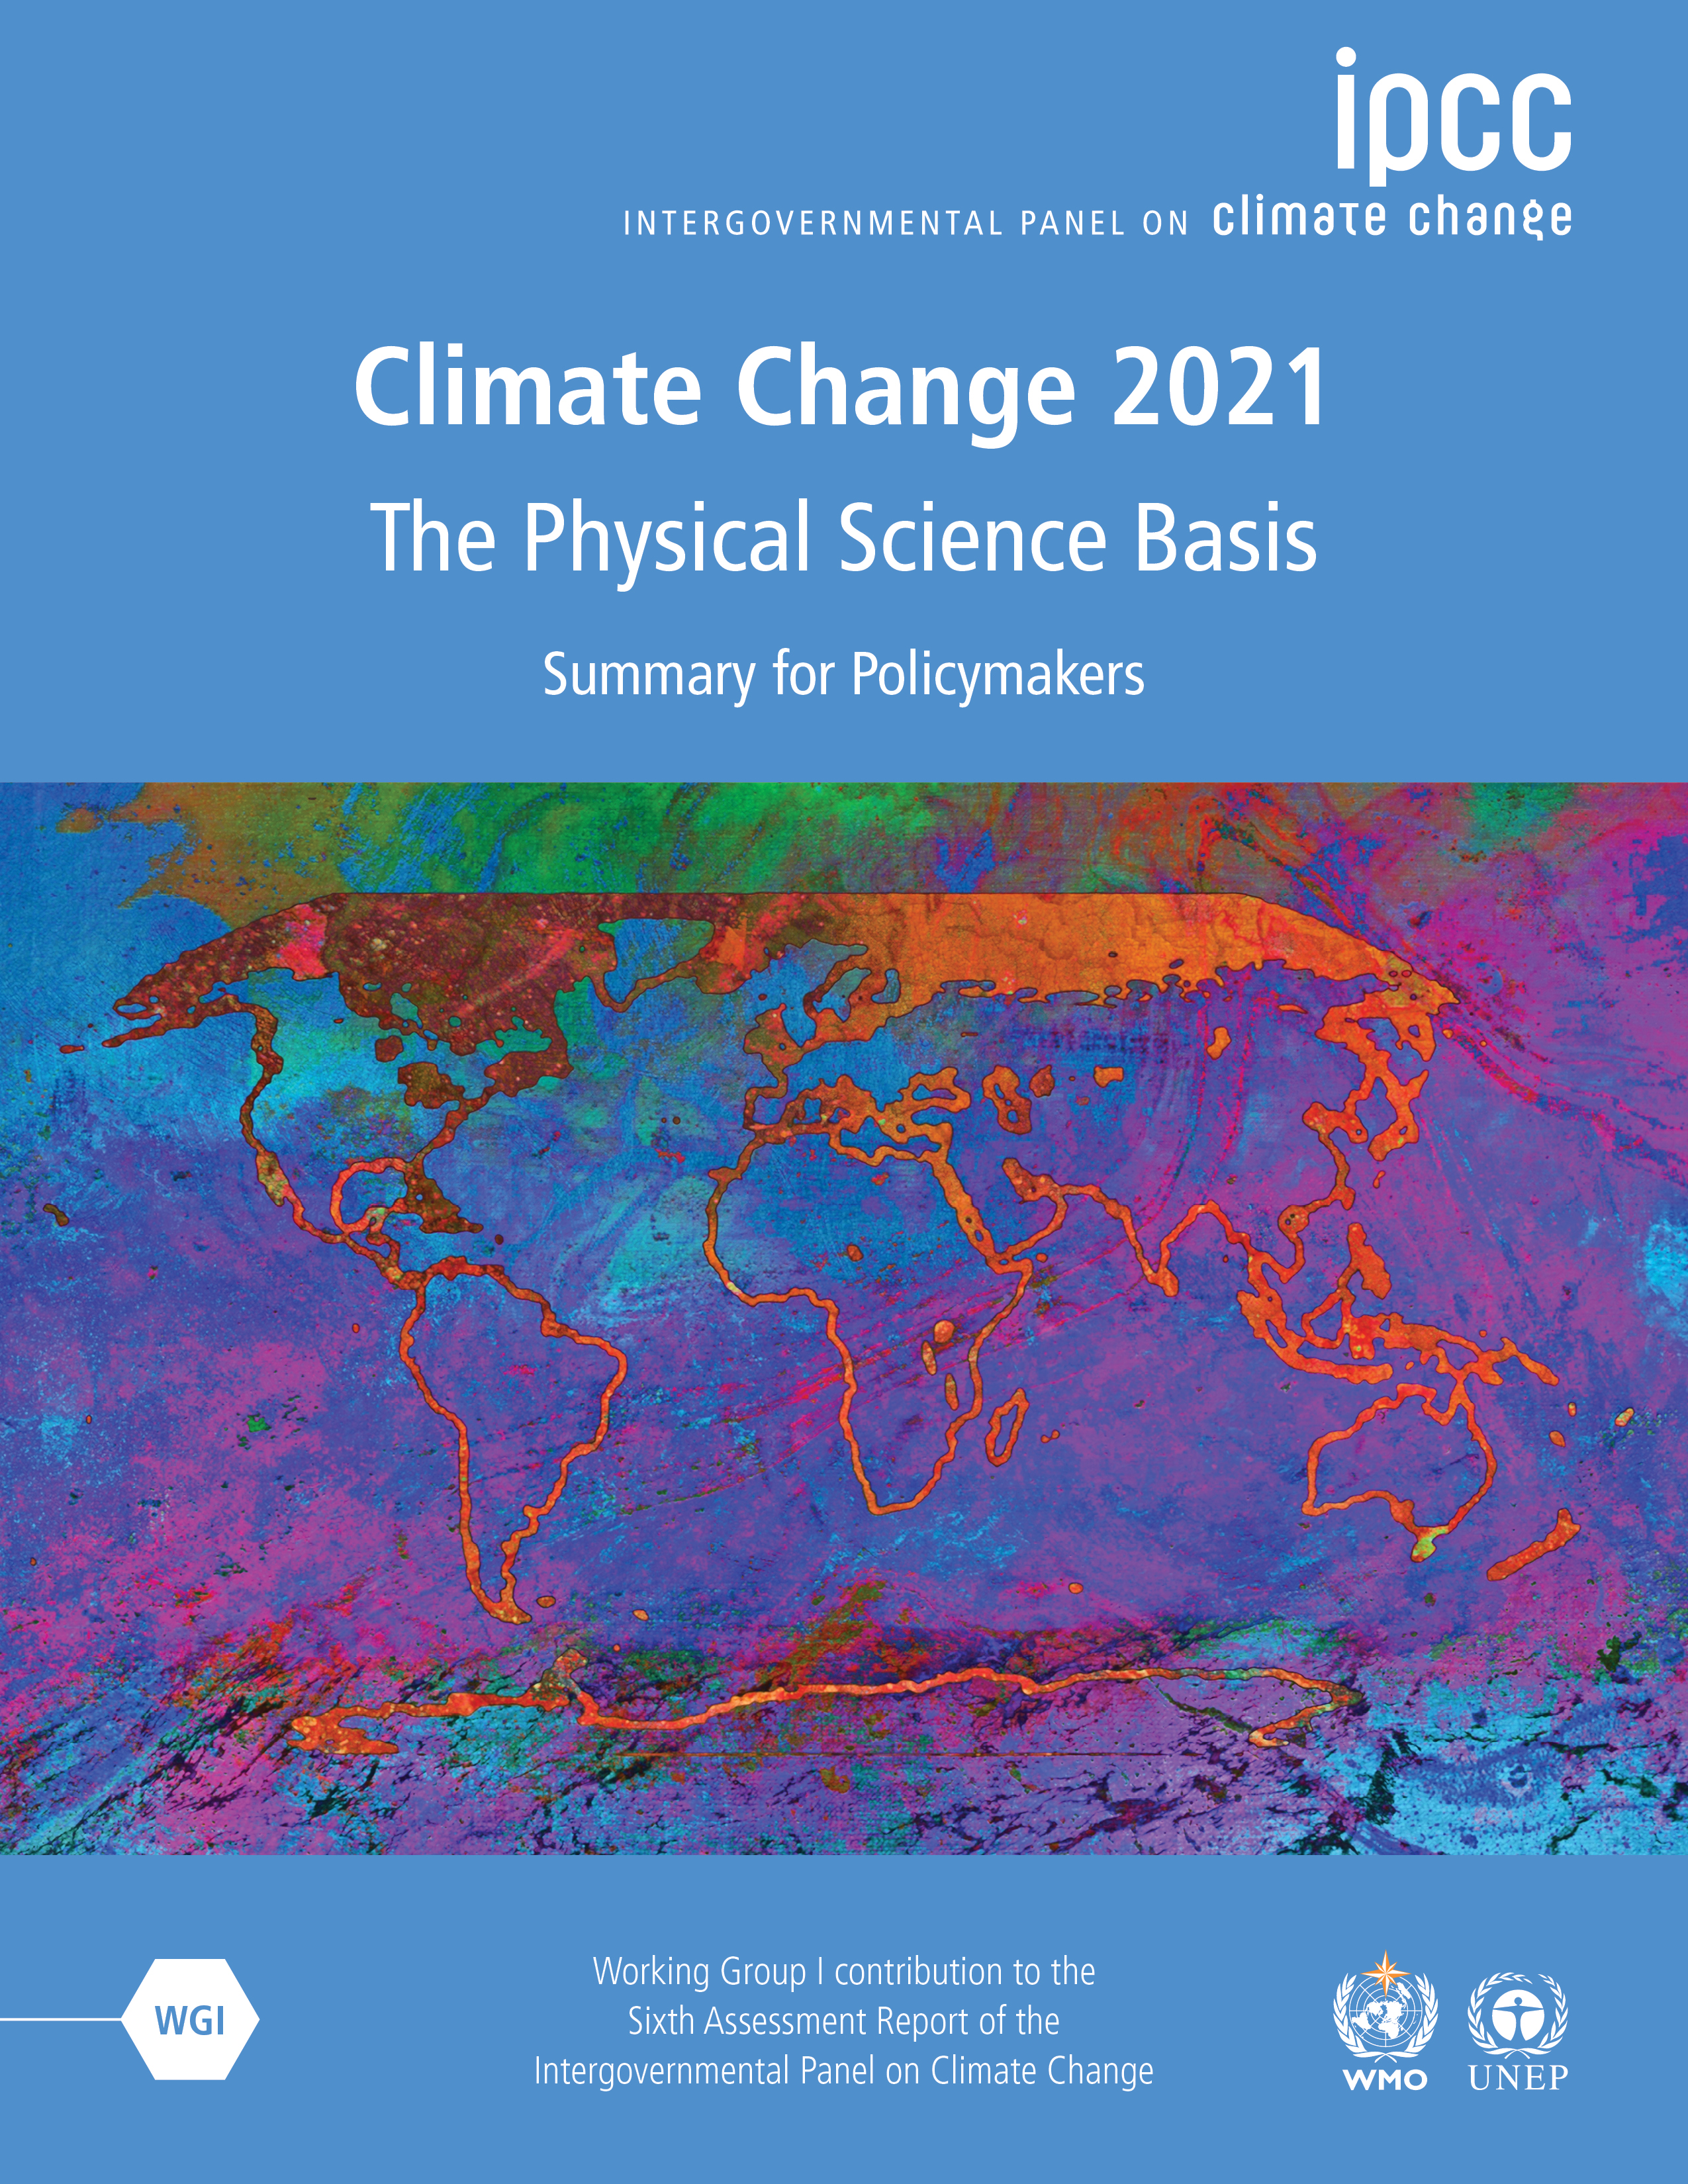 Cover of the new IPCC report